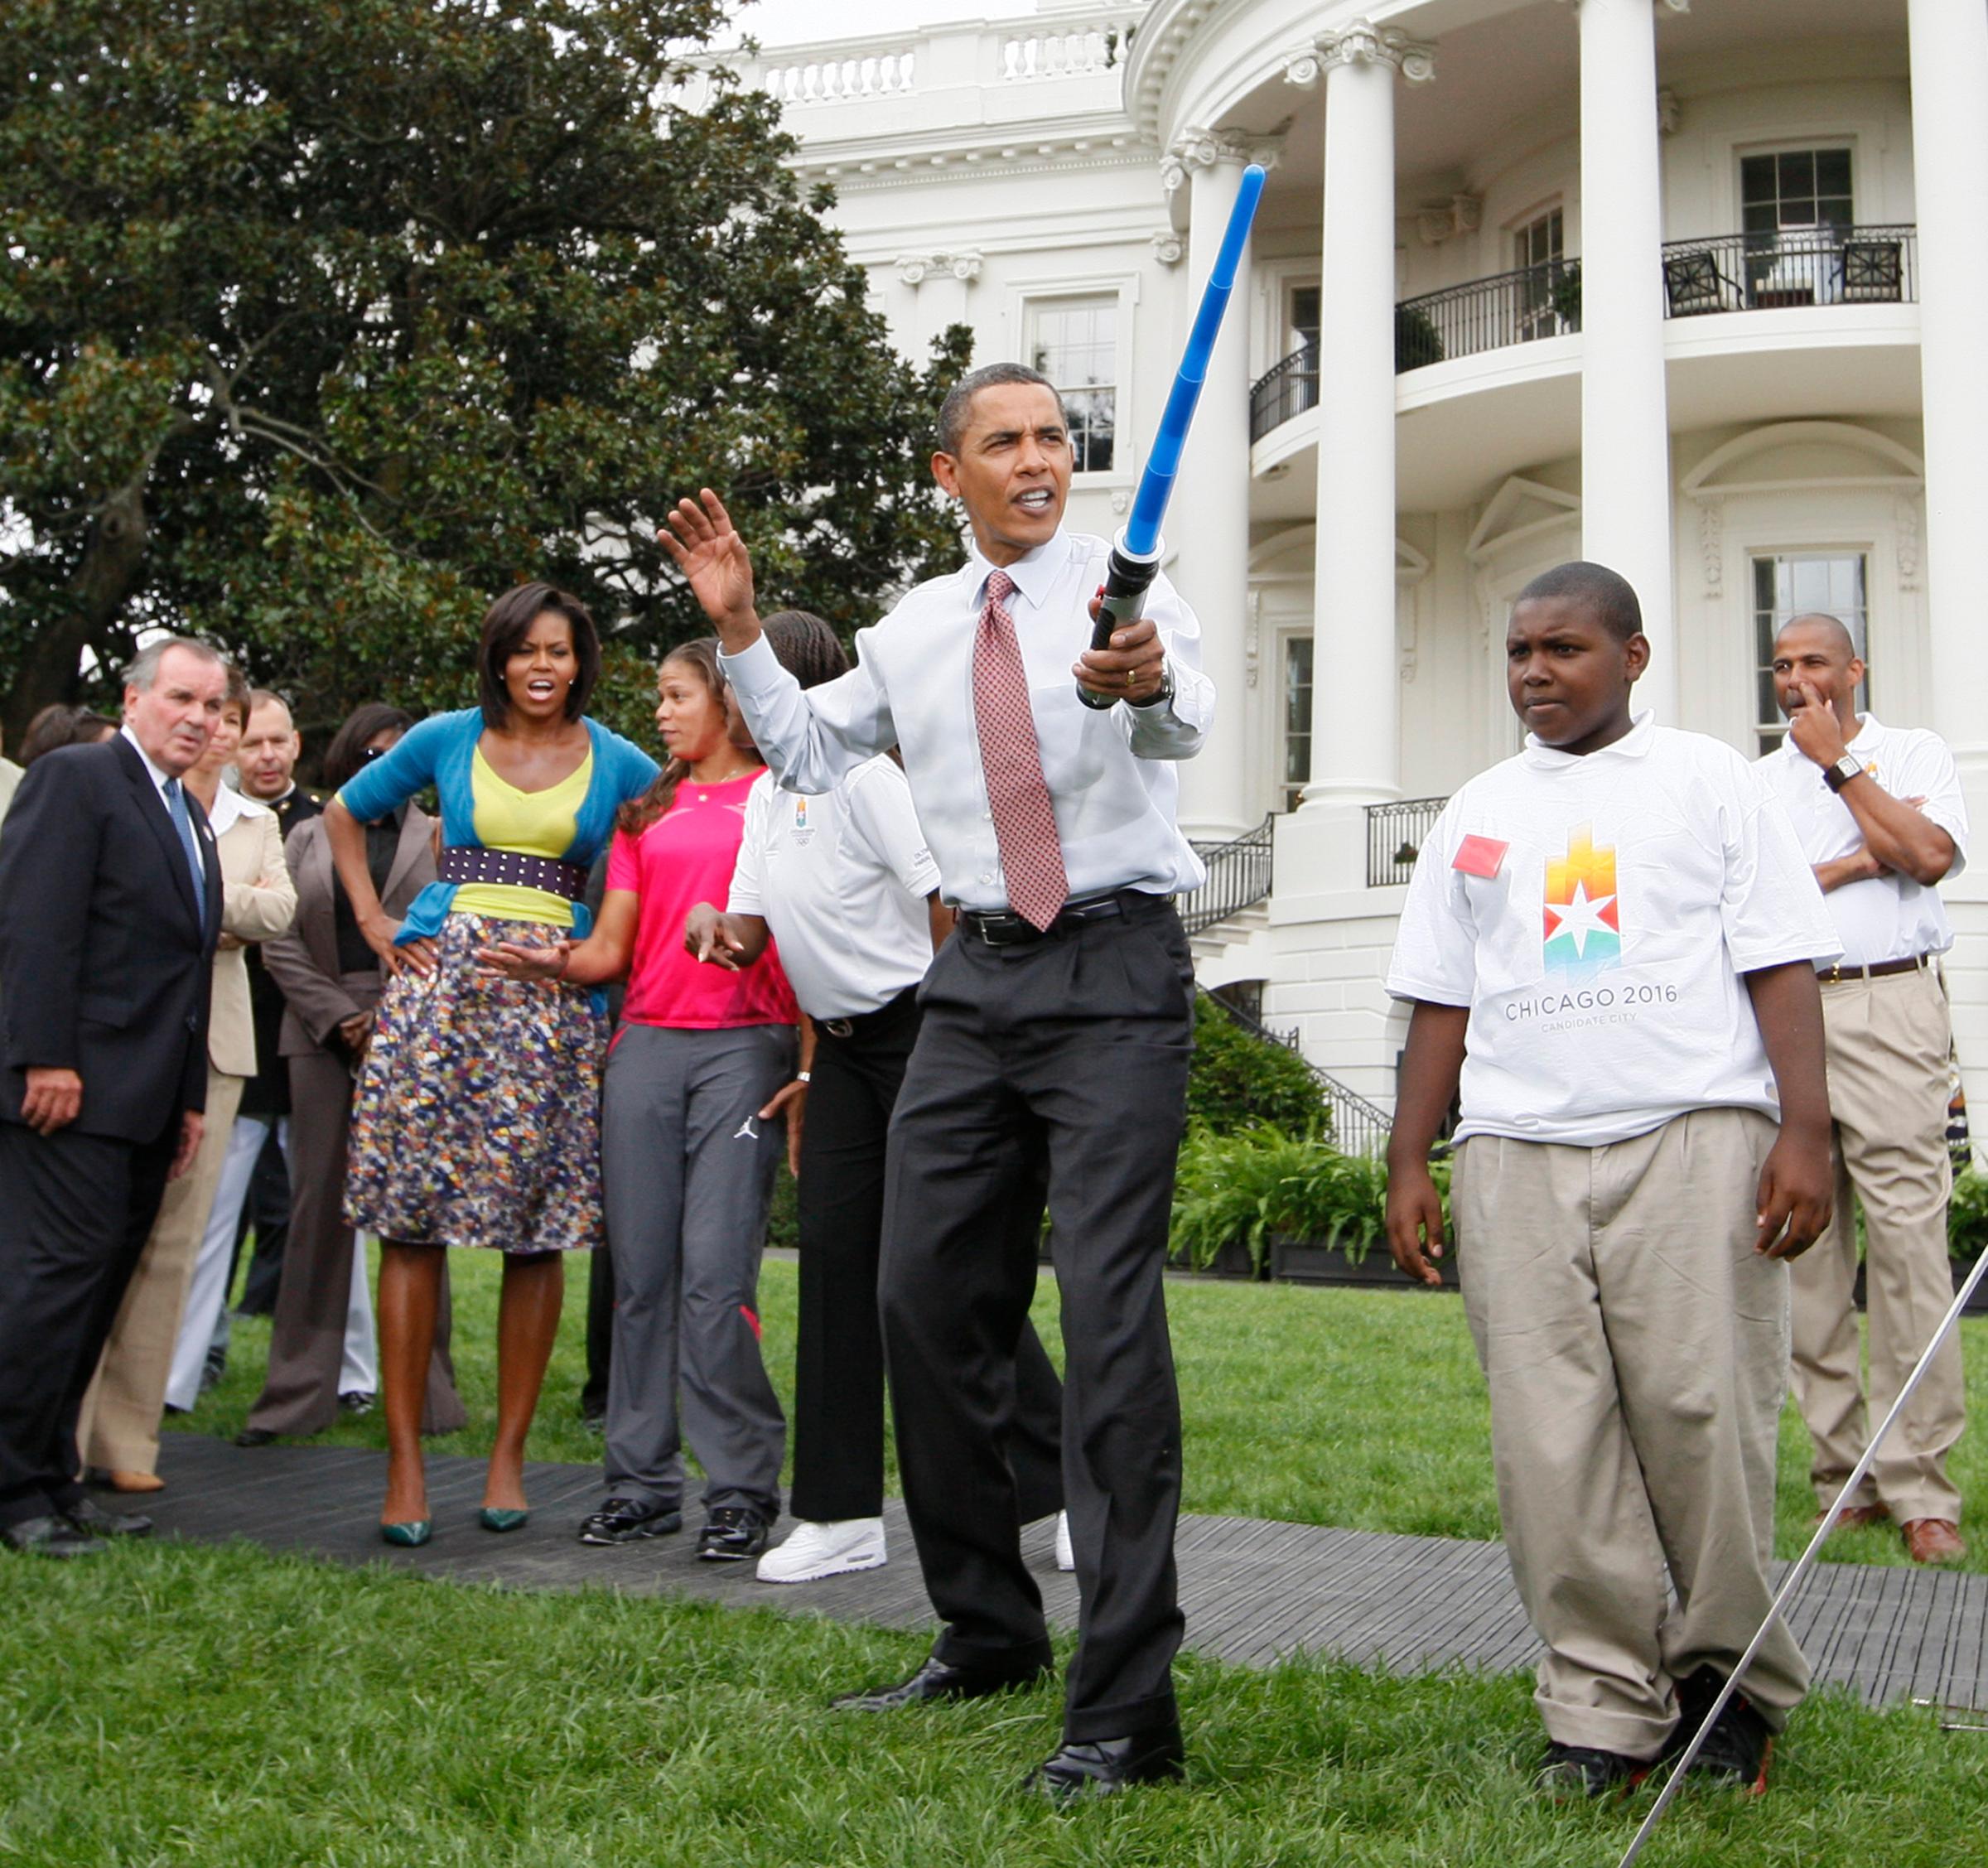 President Barack Obama uses a light saber as he watches a demonstration of fencing at an event supporting Chicago's 2016 host city Olympic bid, Wednesday, Sept. 16, 2009, on the South Lawn of the White House in Washington.